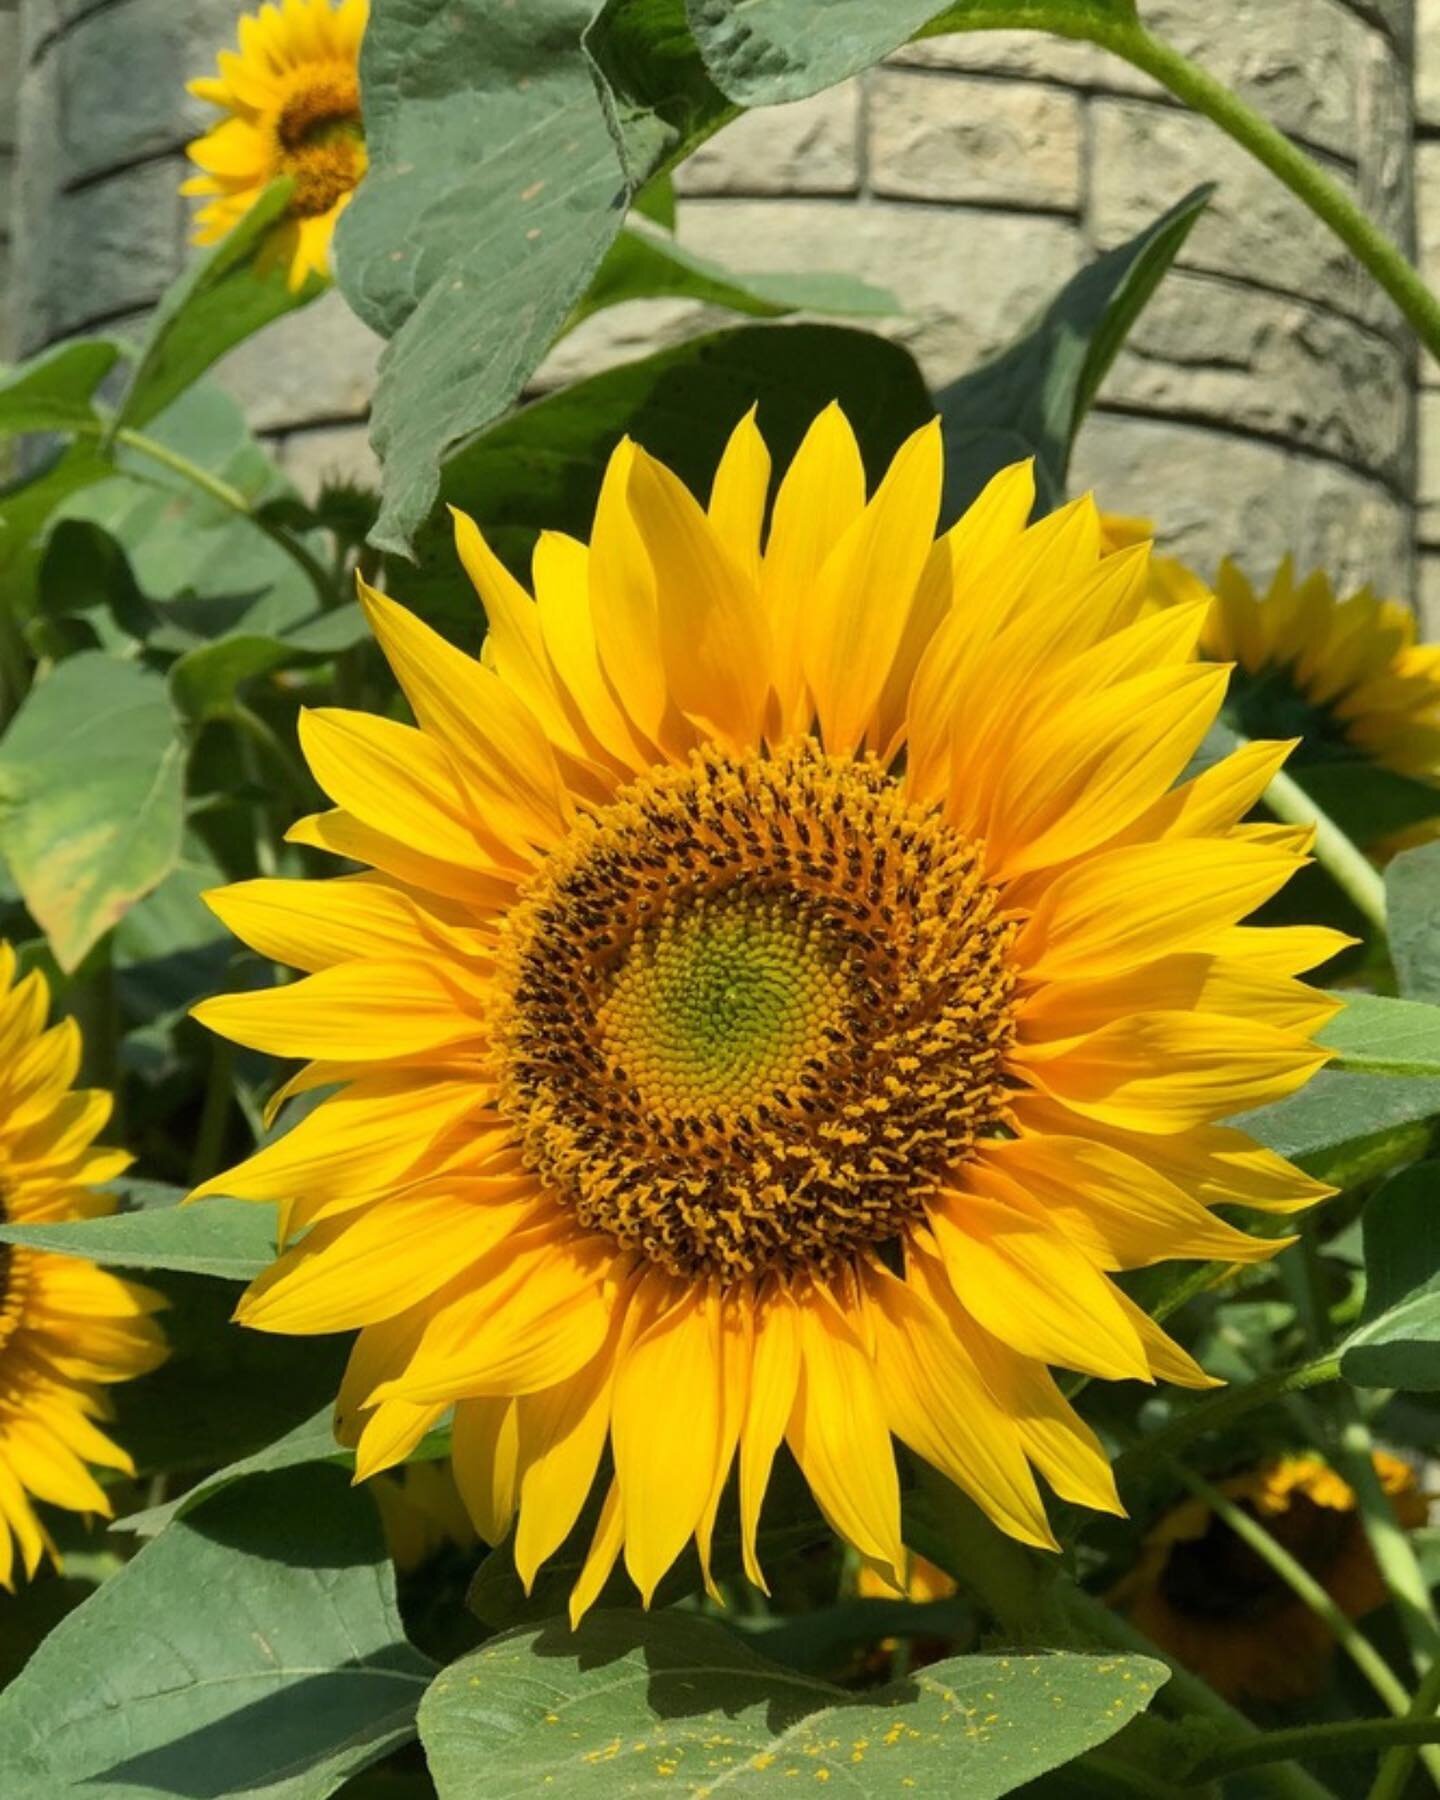 Do you have a spot in your garden that receives full sun? These statement flowers love a bright sunny area! 

The Yellow Sunflower, Hibiscus, Bird of Paradise and Sunflower &lsquo;Ruby Eclipse&rsquo; love full sun, approximately 6-8 hours of sunlight